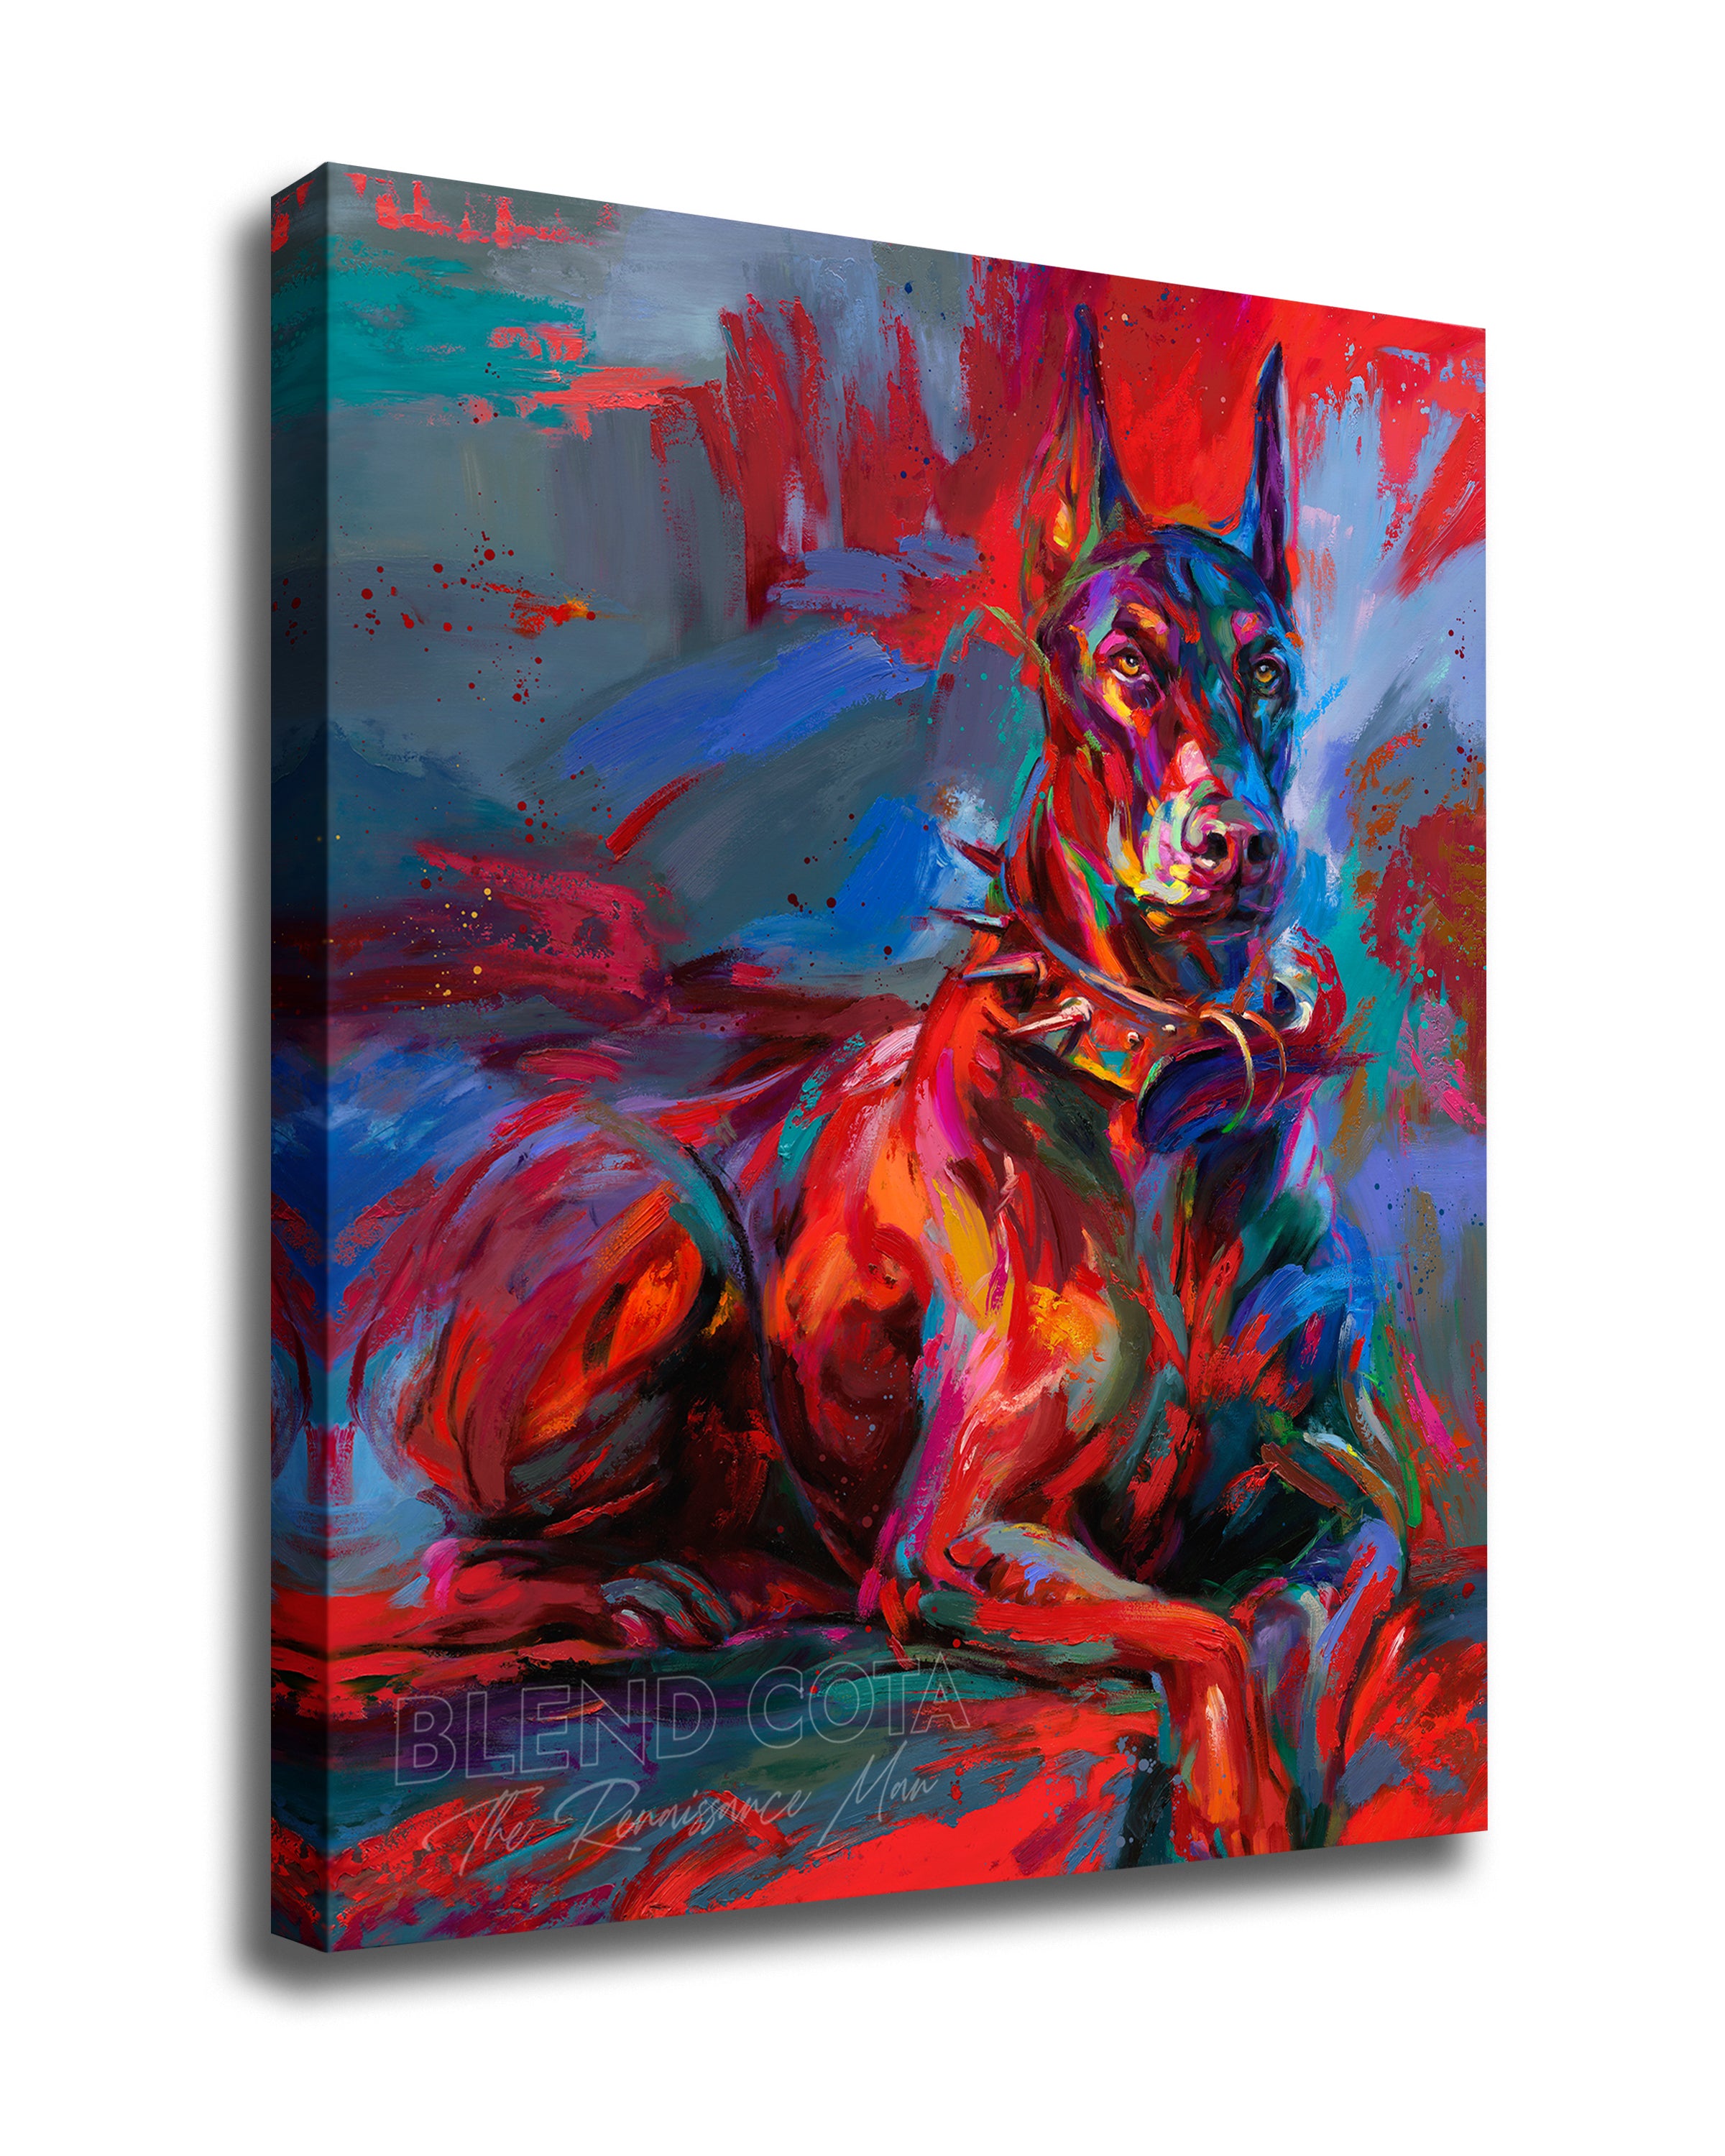 Gallery wrapped art print on canvas of the pet Doberman Apollo, a royal breed of dog, tough, brave and affectionate, guarding those he loves, in colorful brushstrokes, color expressionism style.